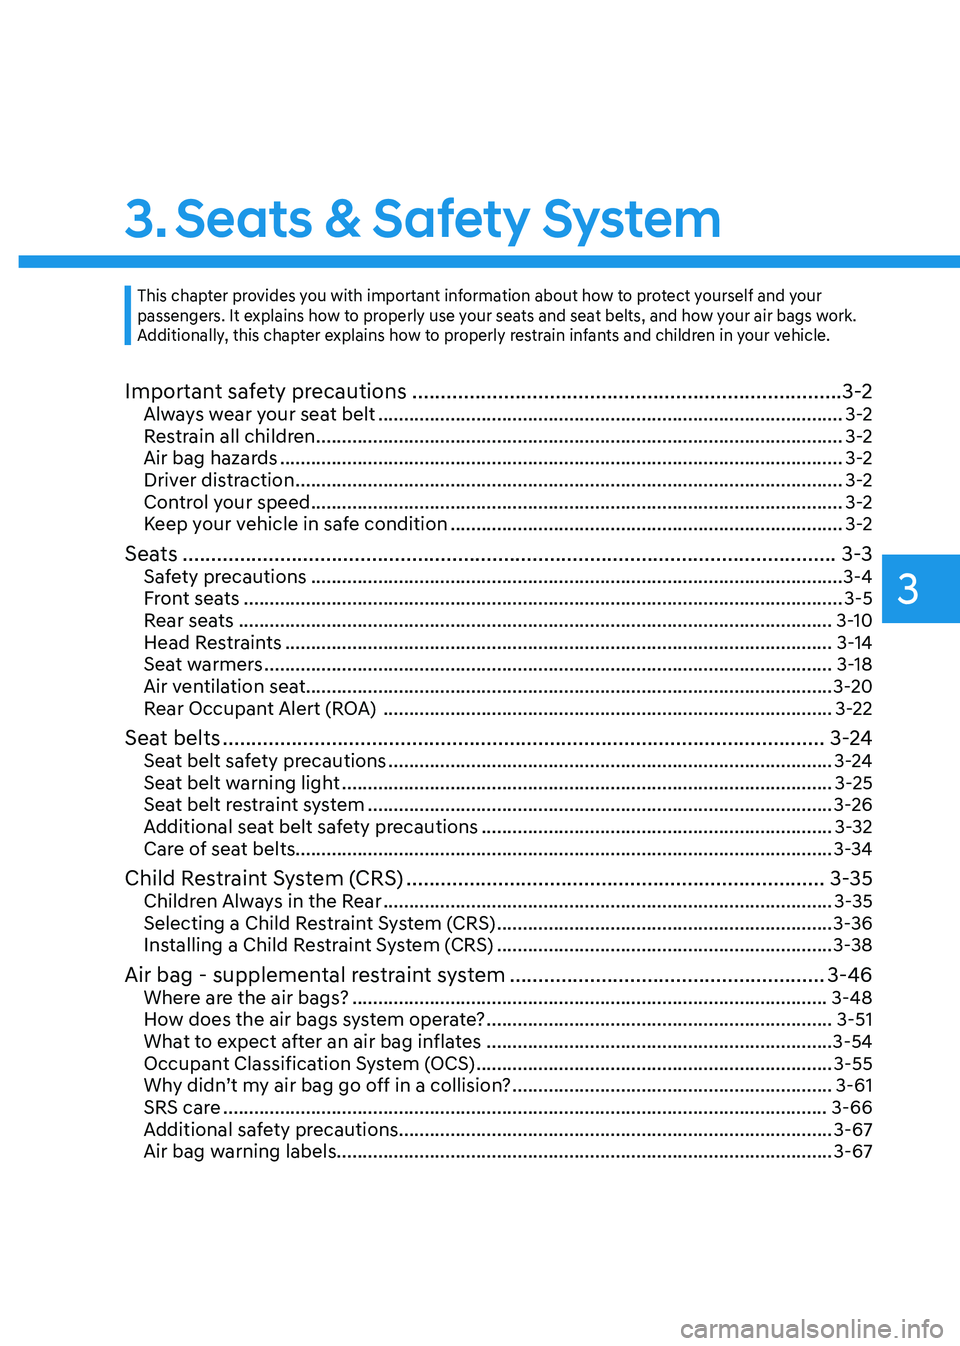 HYUNDAI TUCSON 2022  Owners Manual Seats & Safety System
3. Seats & Safety System
Important safety precautions ........................................................................\
...3-2Always wear your seat belt .................